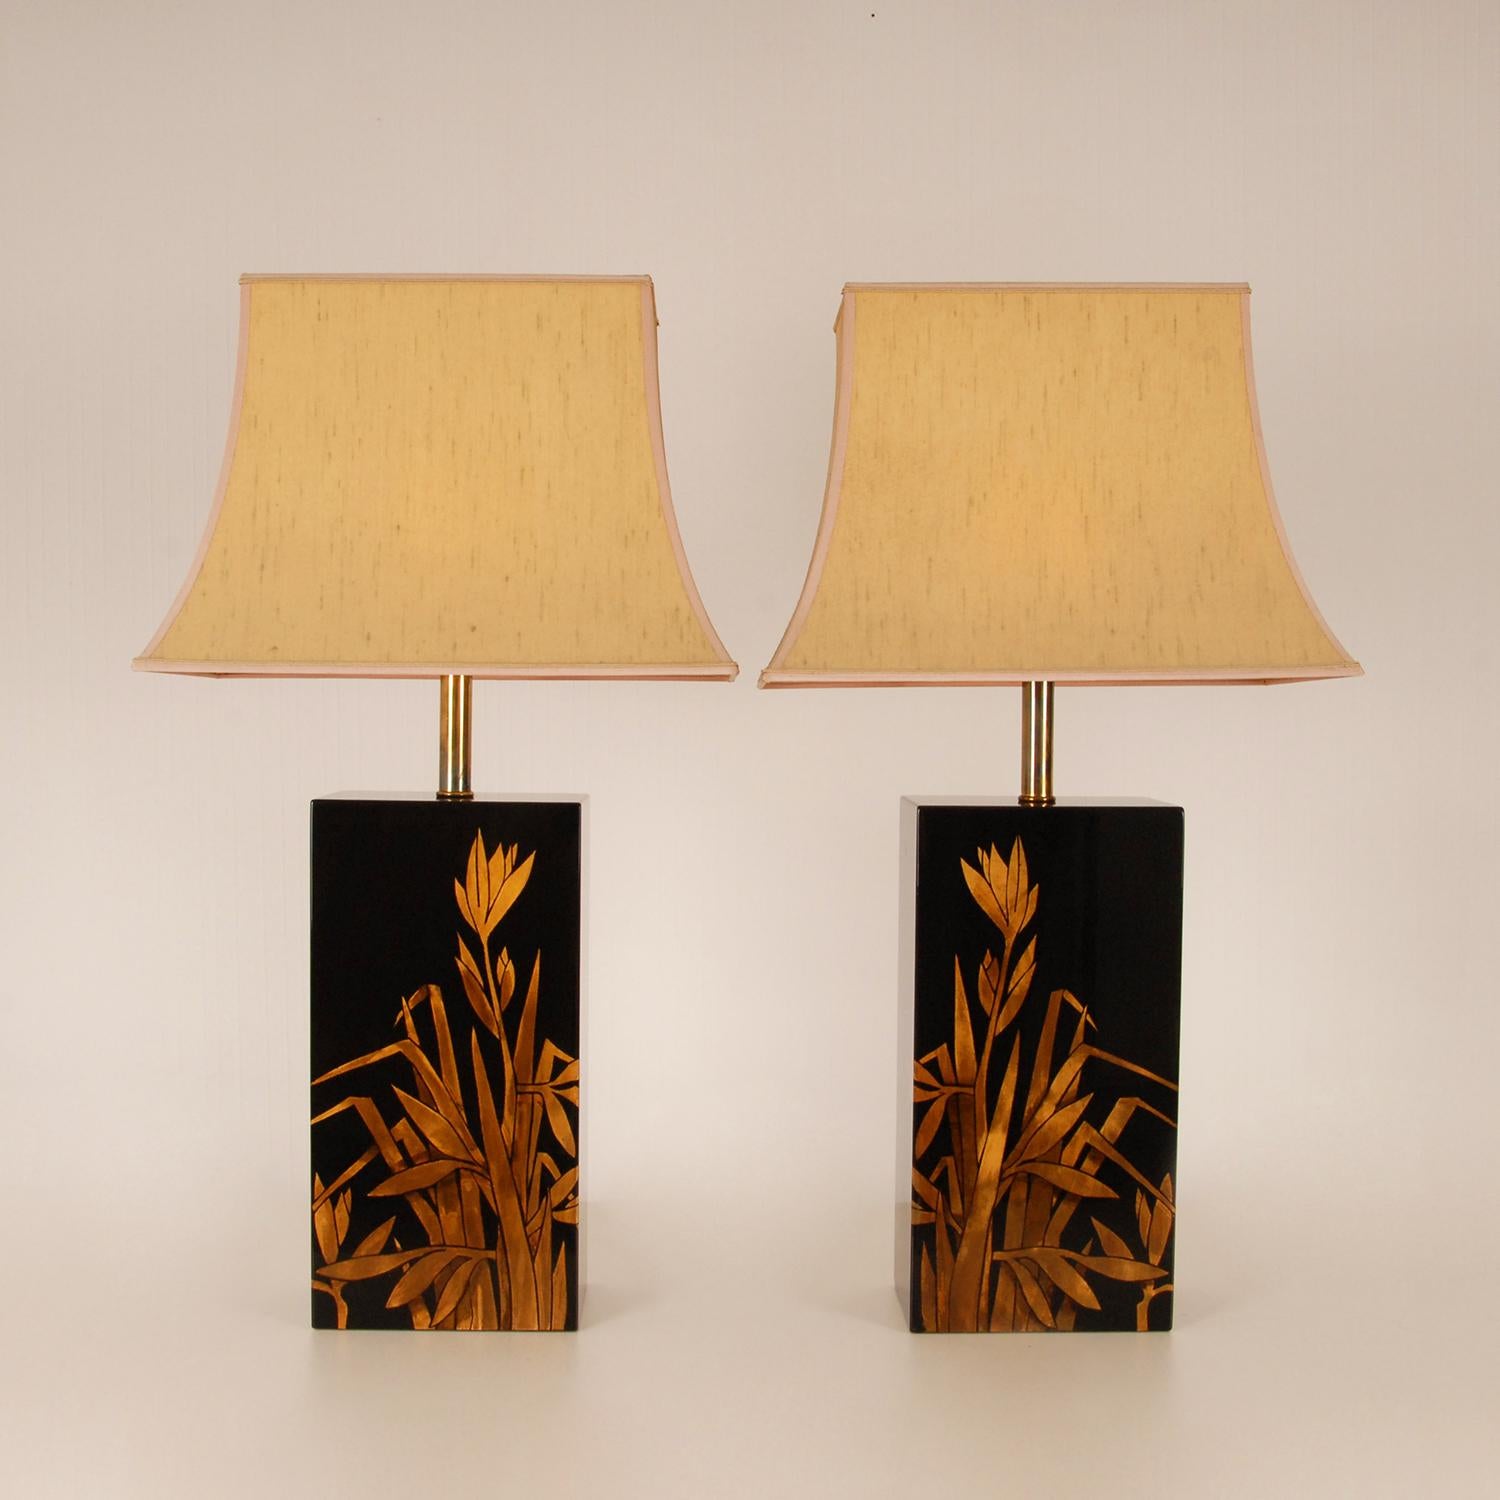 French Vintage Chinoiserie Gold and Black lacquer Pagoda Table Lamps Retro 1970s a Pair For Sale